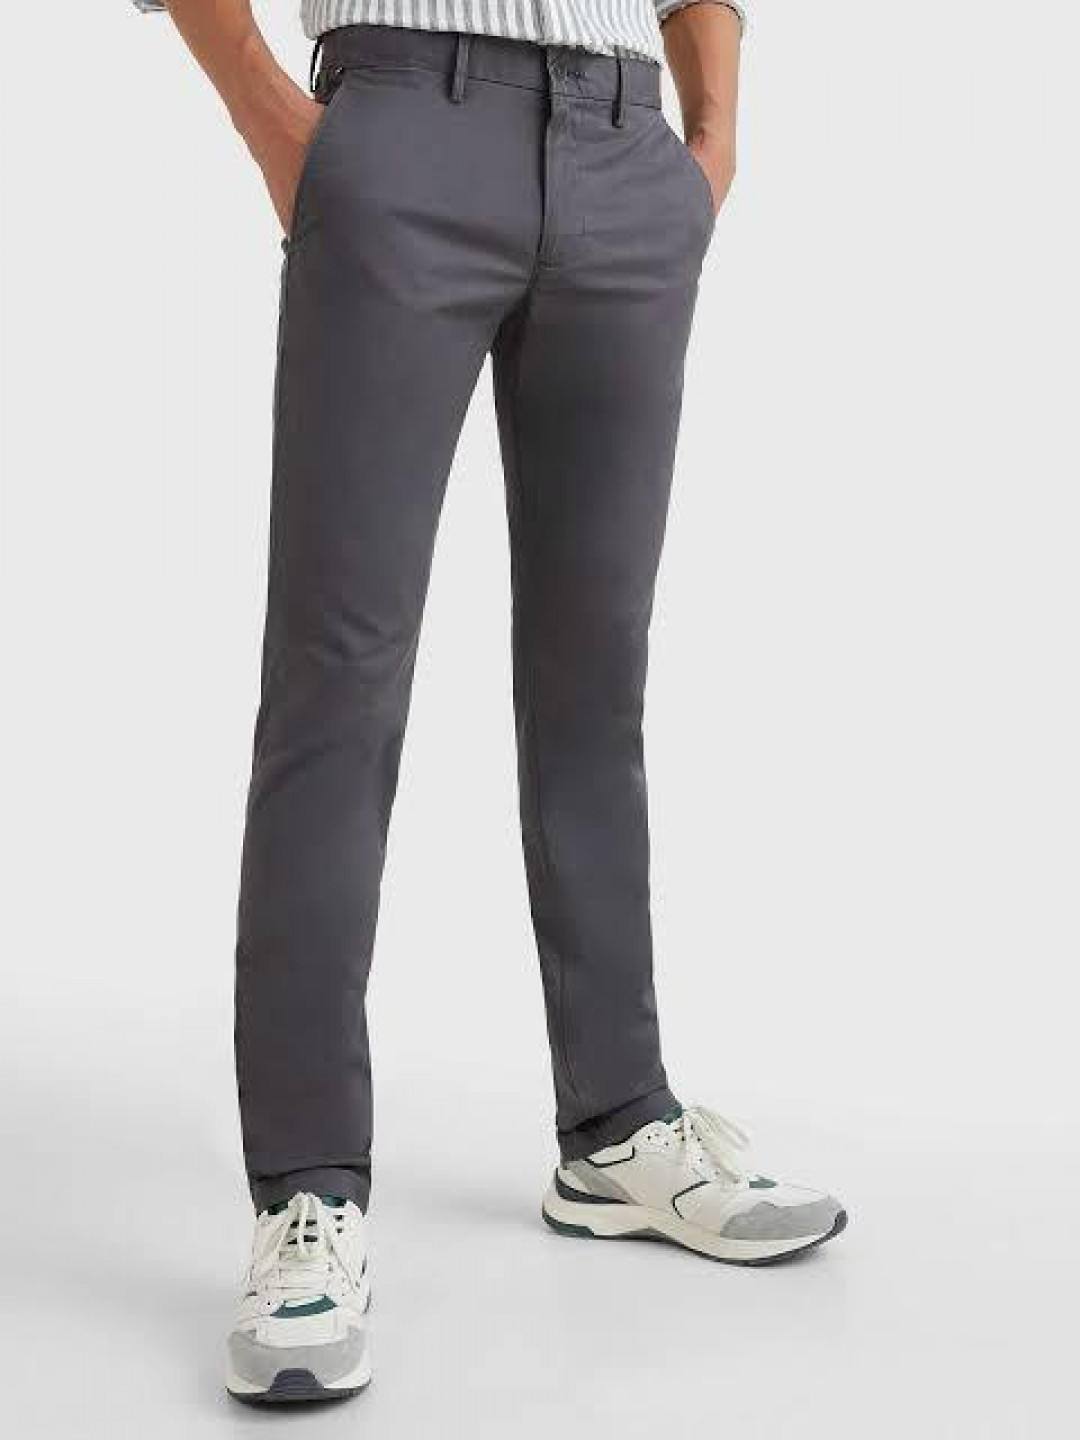 Find Latest Men's Chinos Pants by TOMMY HILFIGER Smart Fit Stretch ...